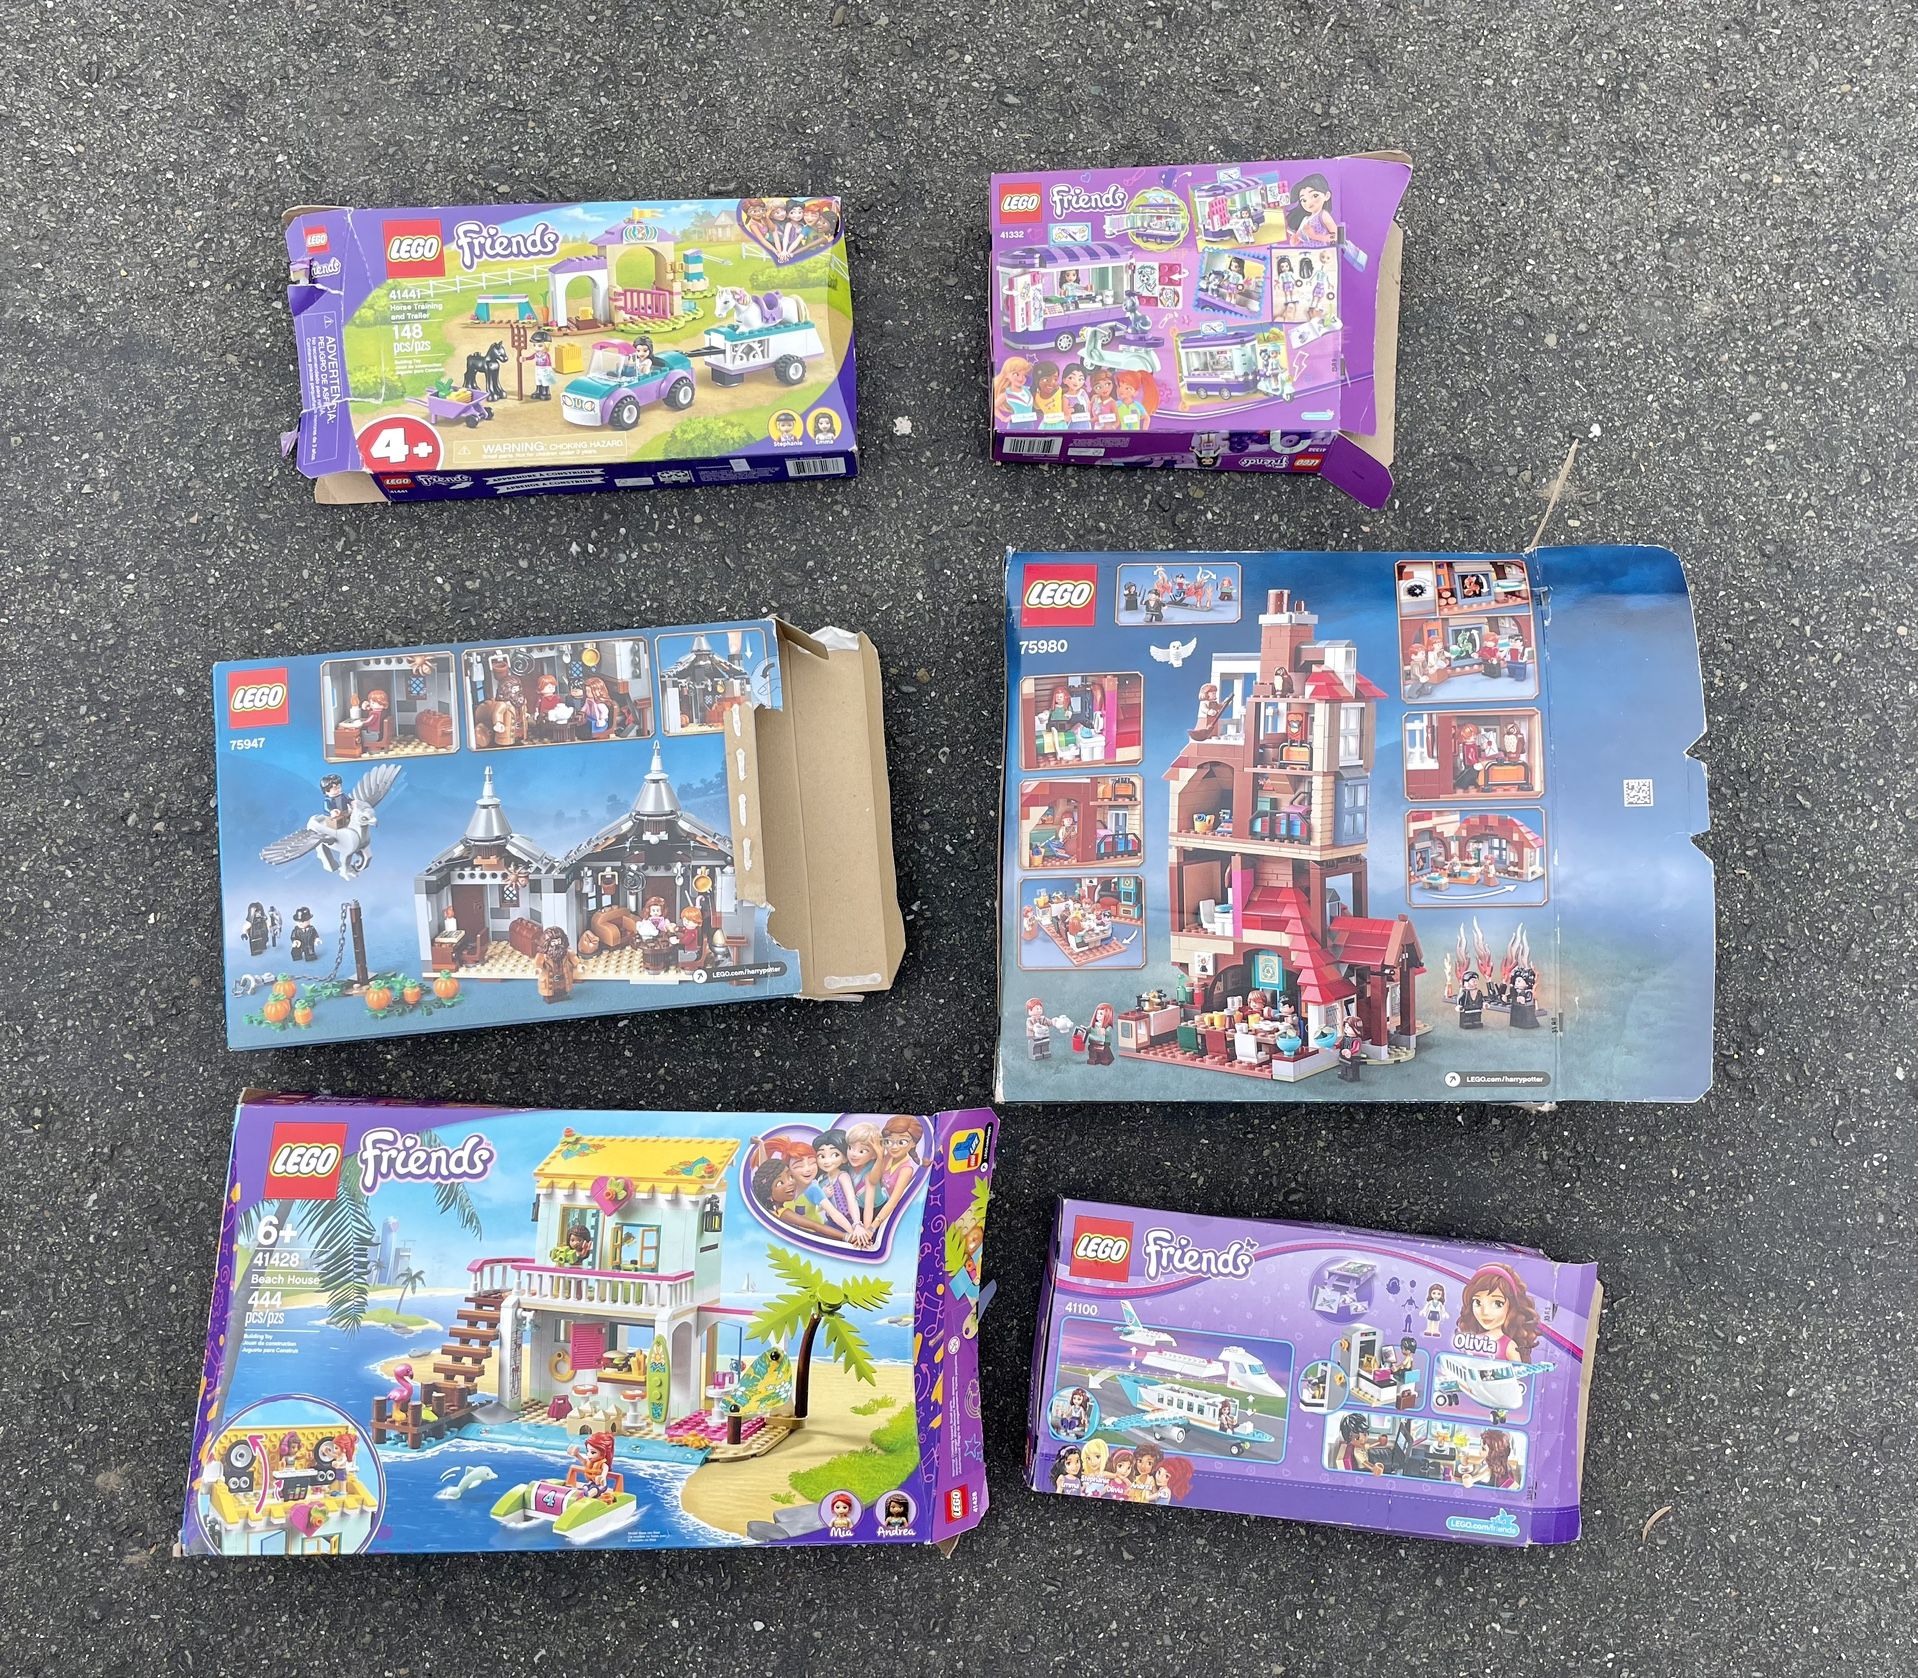 8 Lego Sets (Harry Potter and Lego Friends)